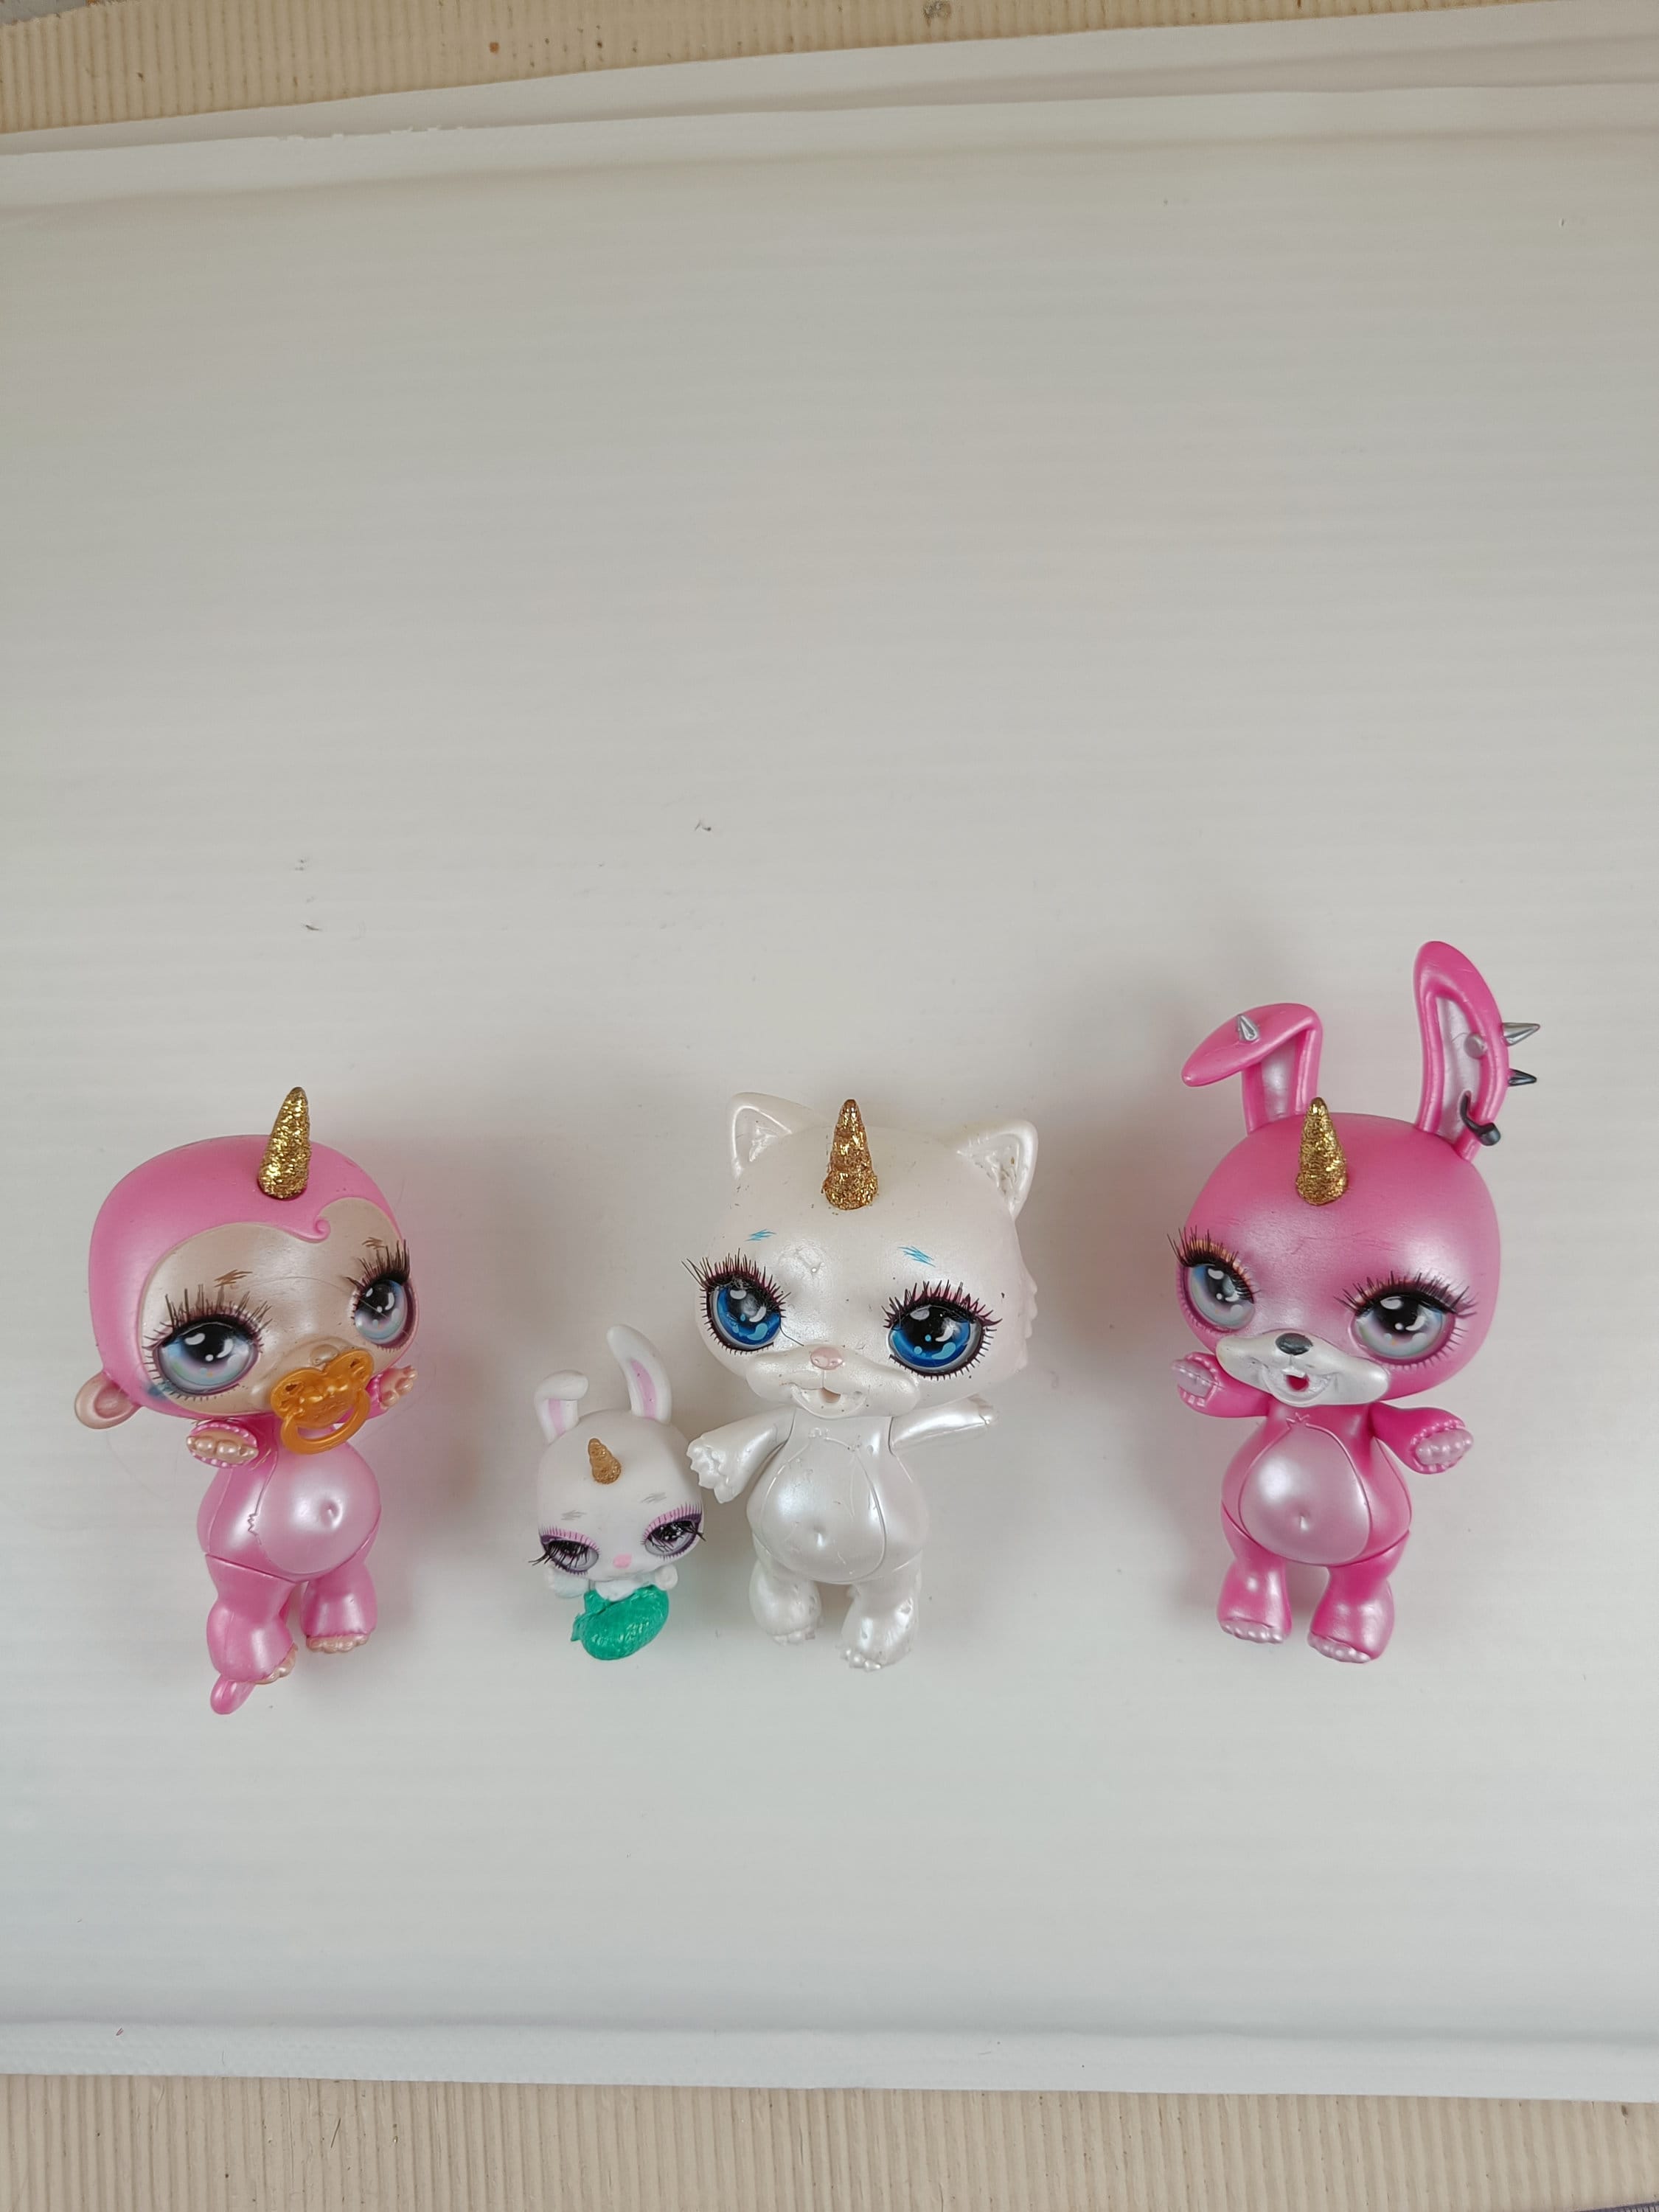 Poopsie Sparkly Critters Series 2-1A